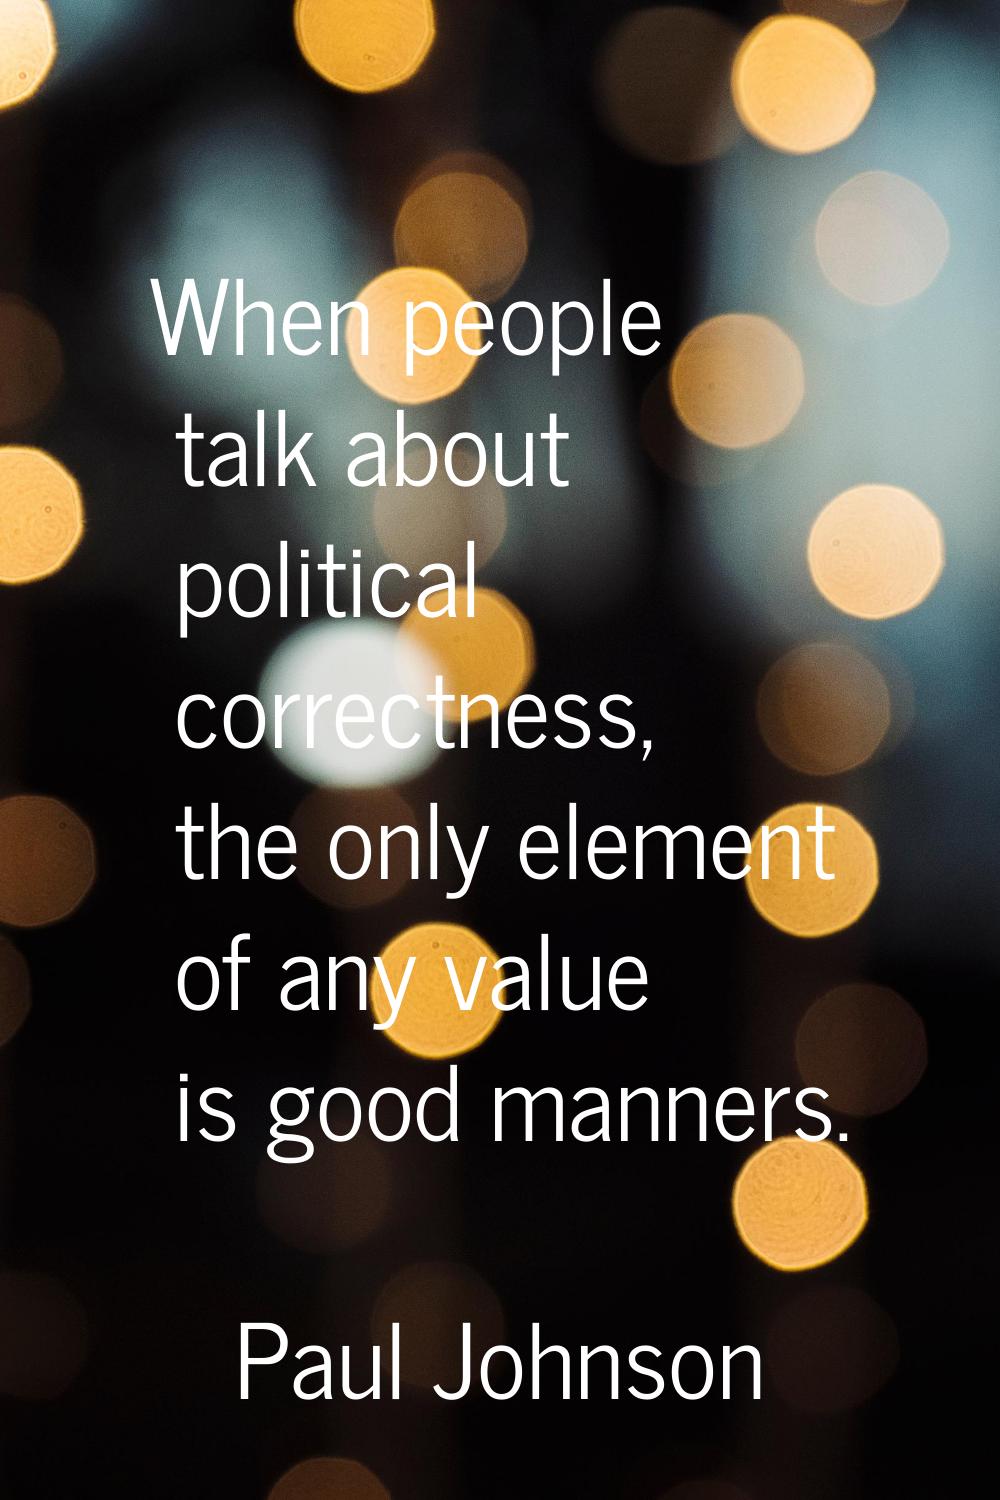 When people talk about political correctness, the only element of any value is good manners.